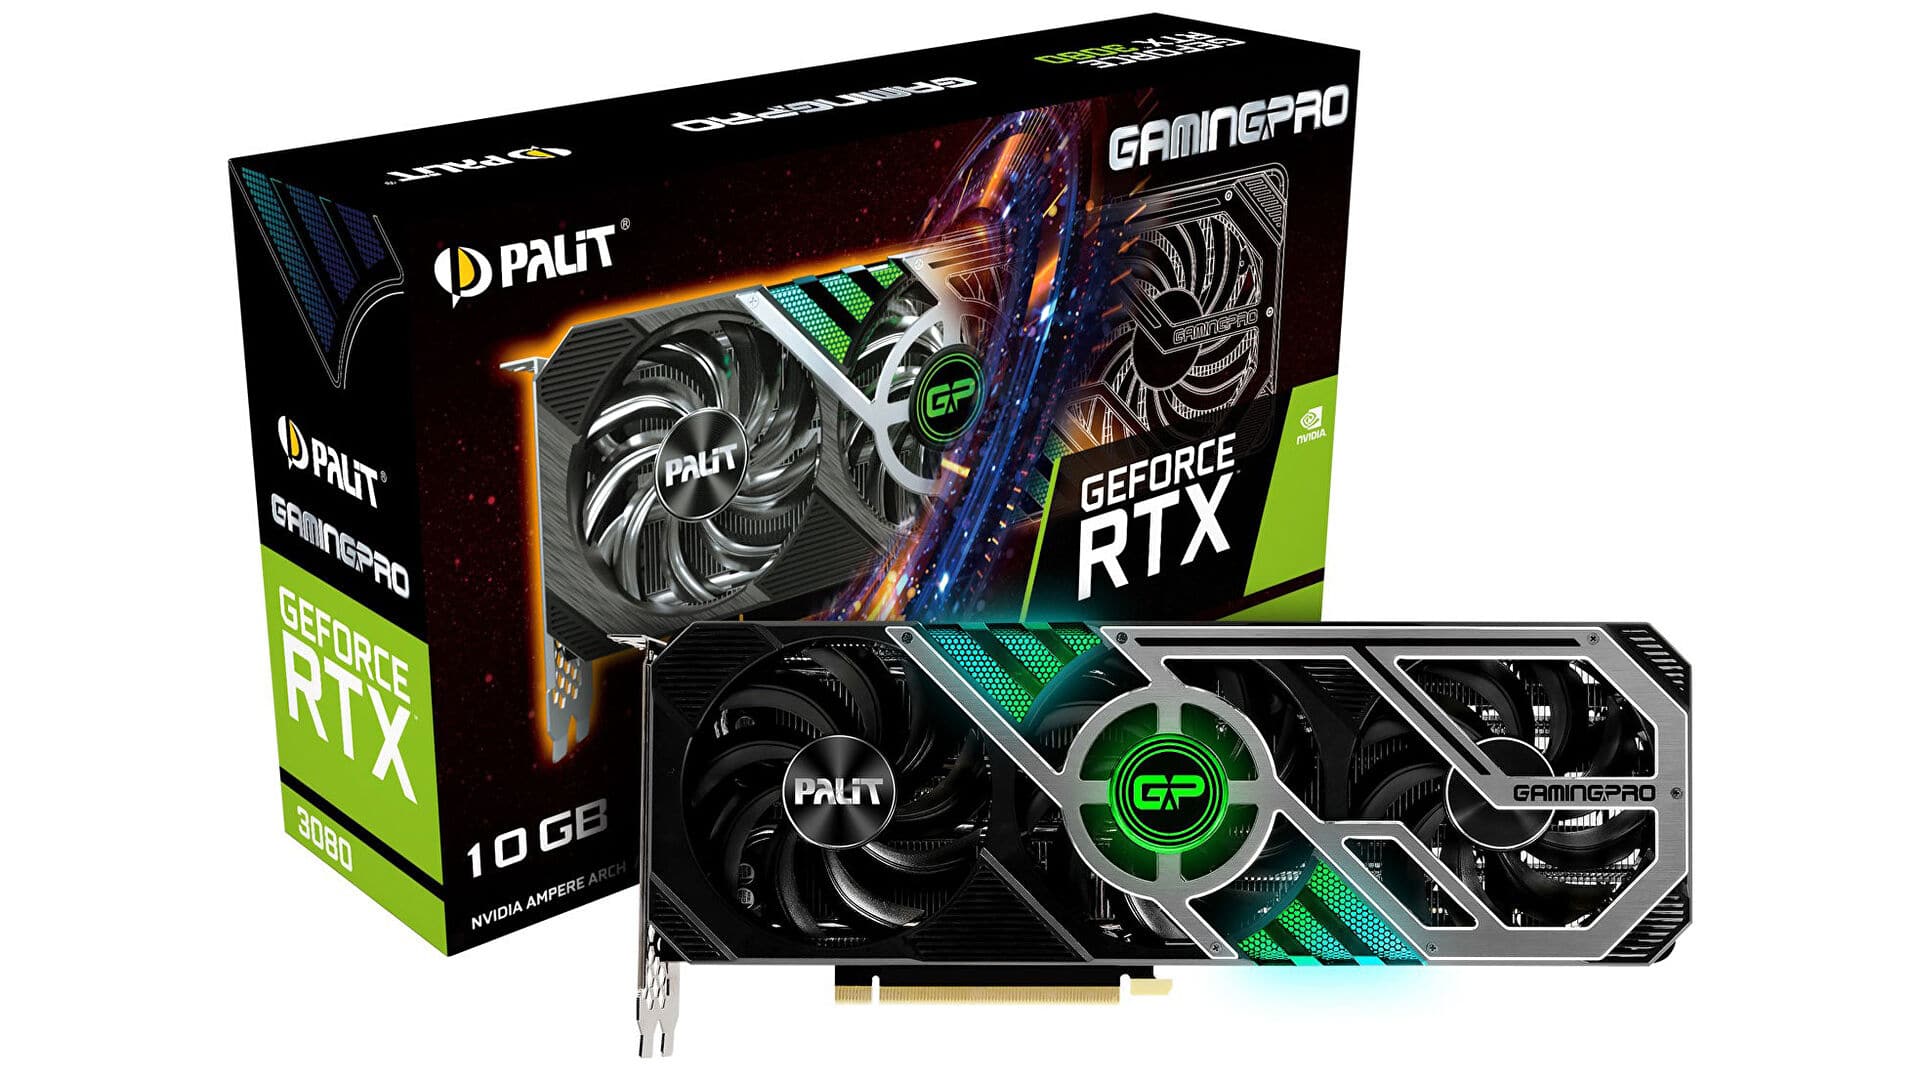 This RTX 3080 graphics card costs just £860 in the UK